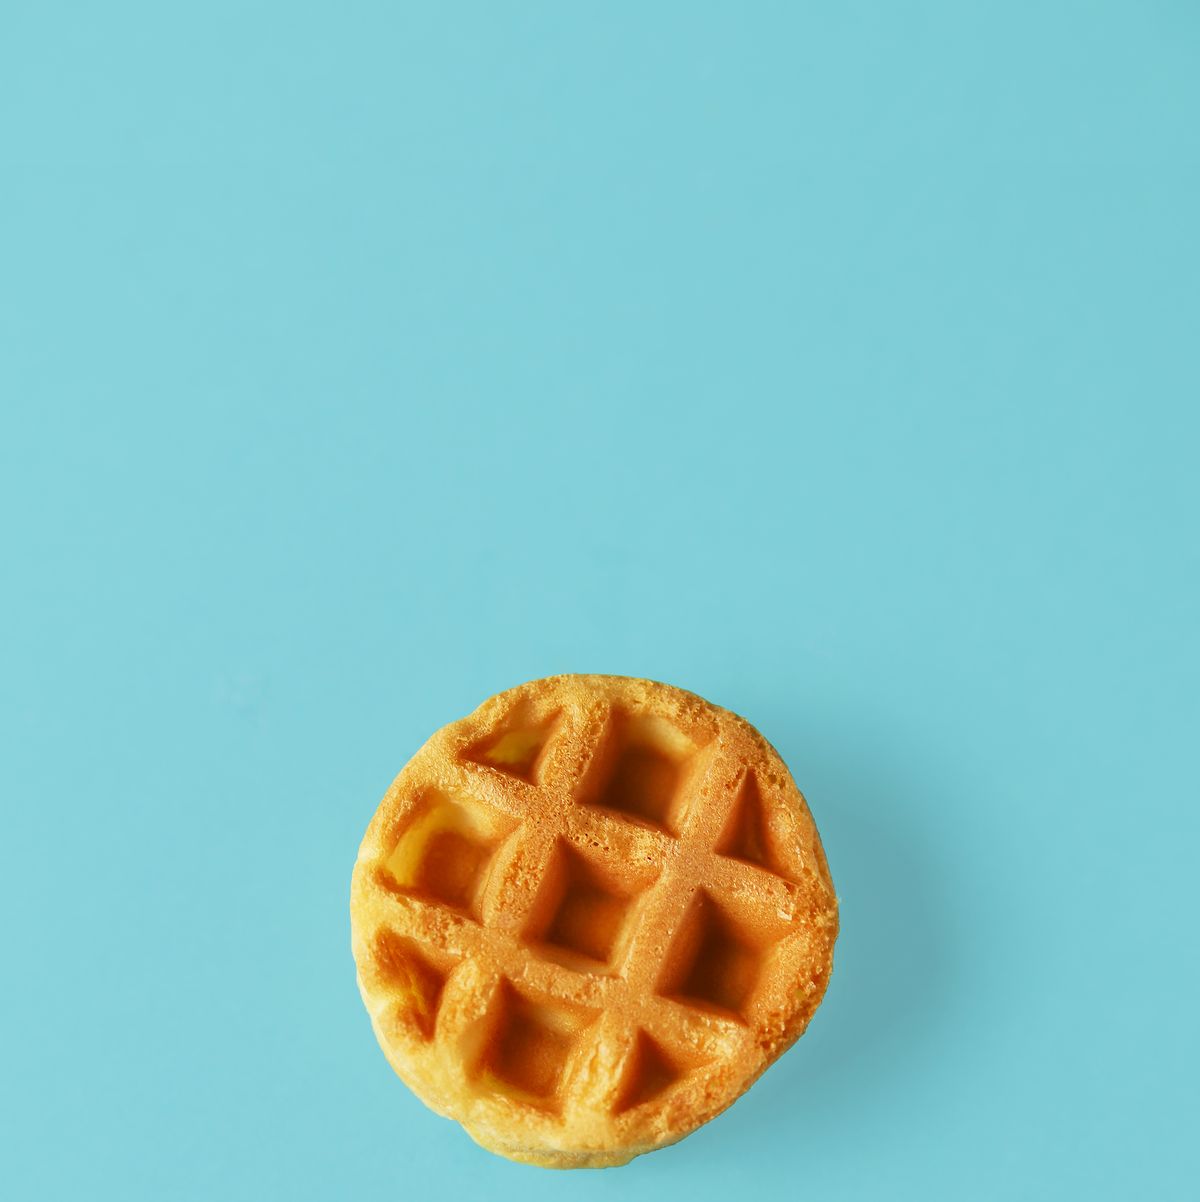 https://hips.hearstapps.com/hmg-prod/images/small-round-belgian-waffle-on-trendy-blue-royalty-free-image-1653068553.jpg?crop=1.00xw:0.668xh;0,0.170xh&resize=1200:*